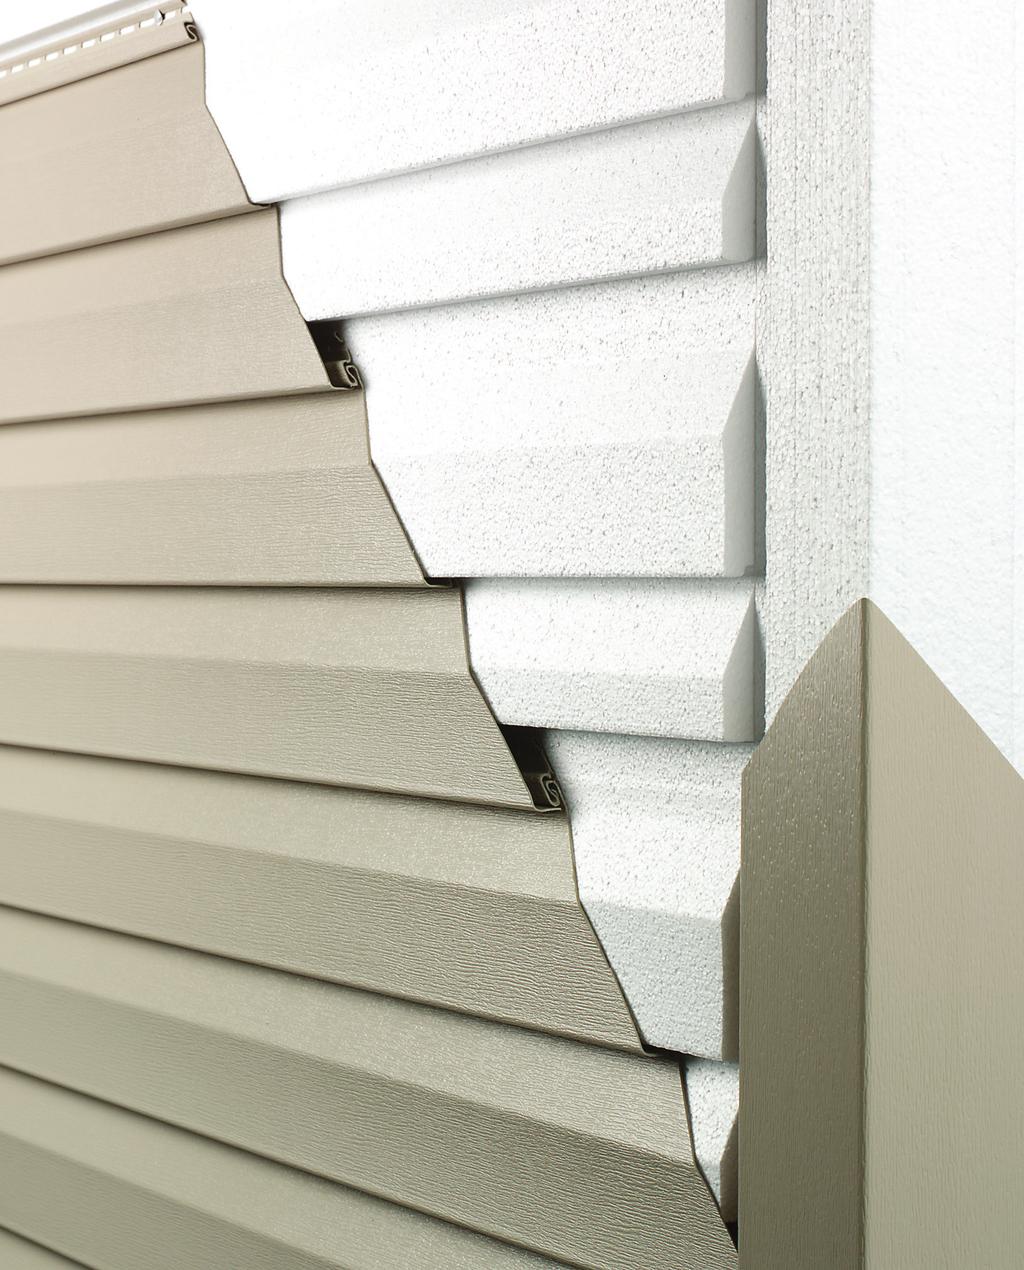 FullbackV siding insulation is contoured to fill the gap